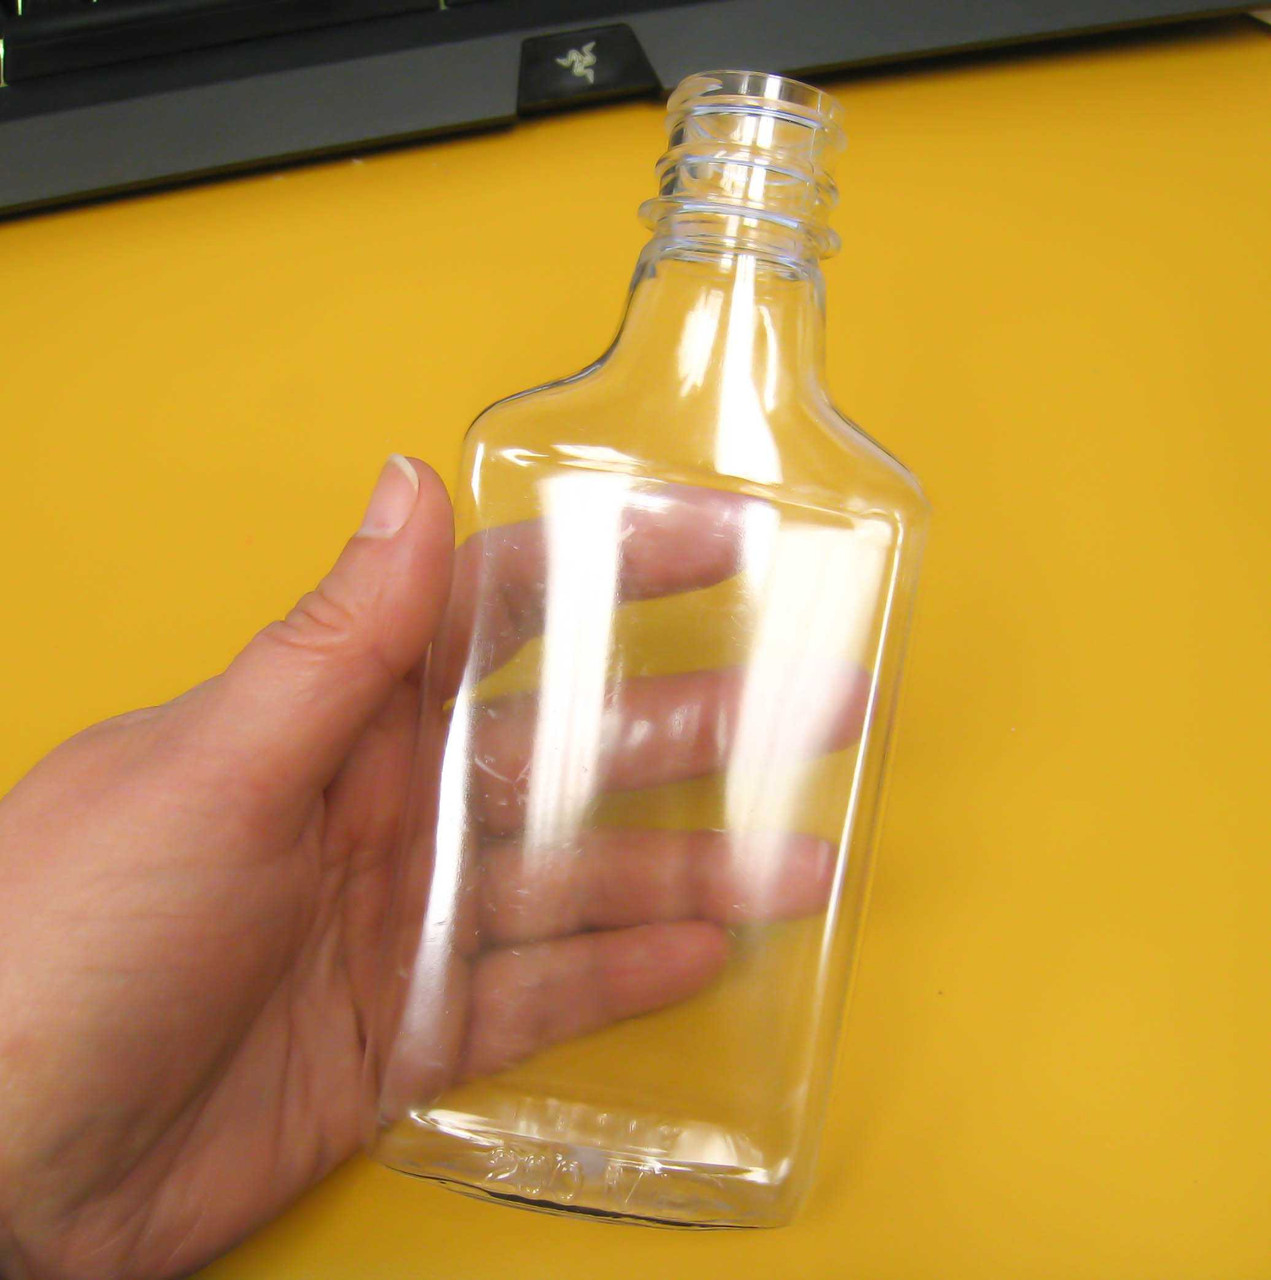 https://cdn11.bigcommerce.com/s-1ybtx/images/stencil/1280x1280/products/1206/6537/200-ml-PET-Clear-Plastic-Flask-Bottle-with-Tamper-Evident-Cap_4945__16018.1674335521.jpg?c=2?imbypass=on